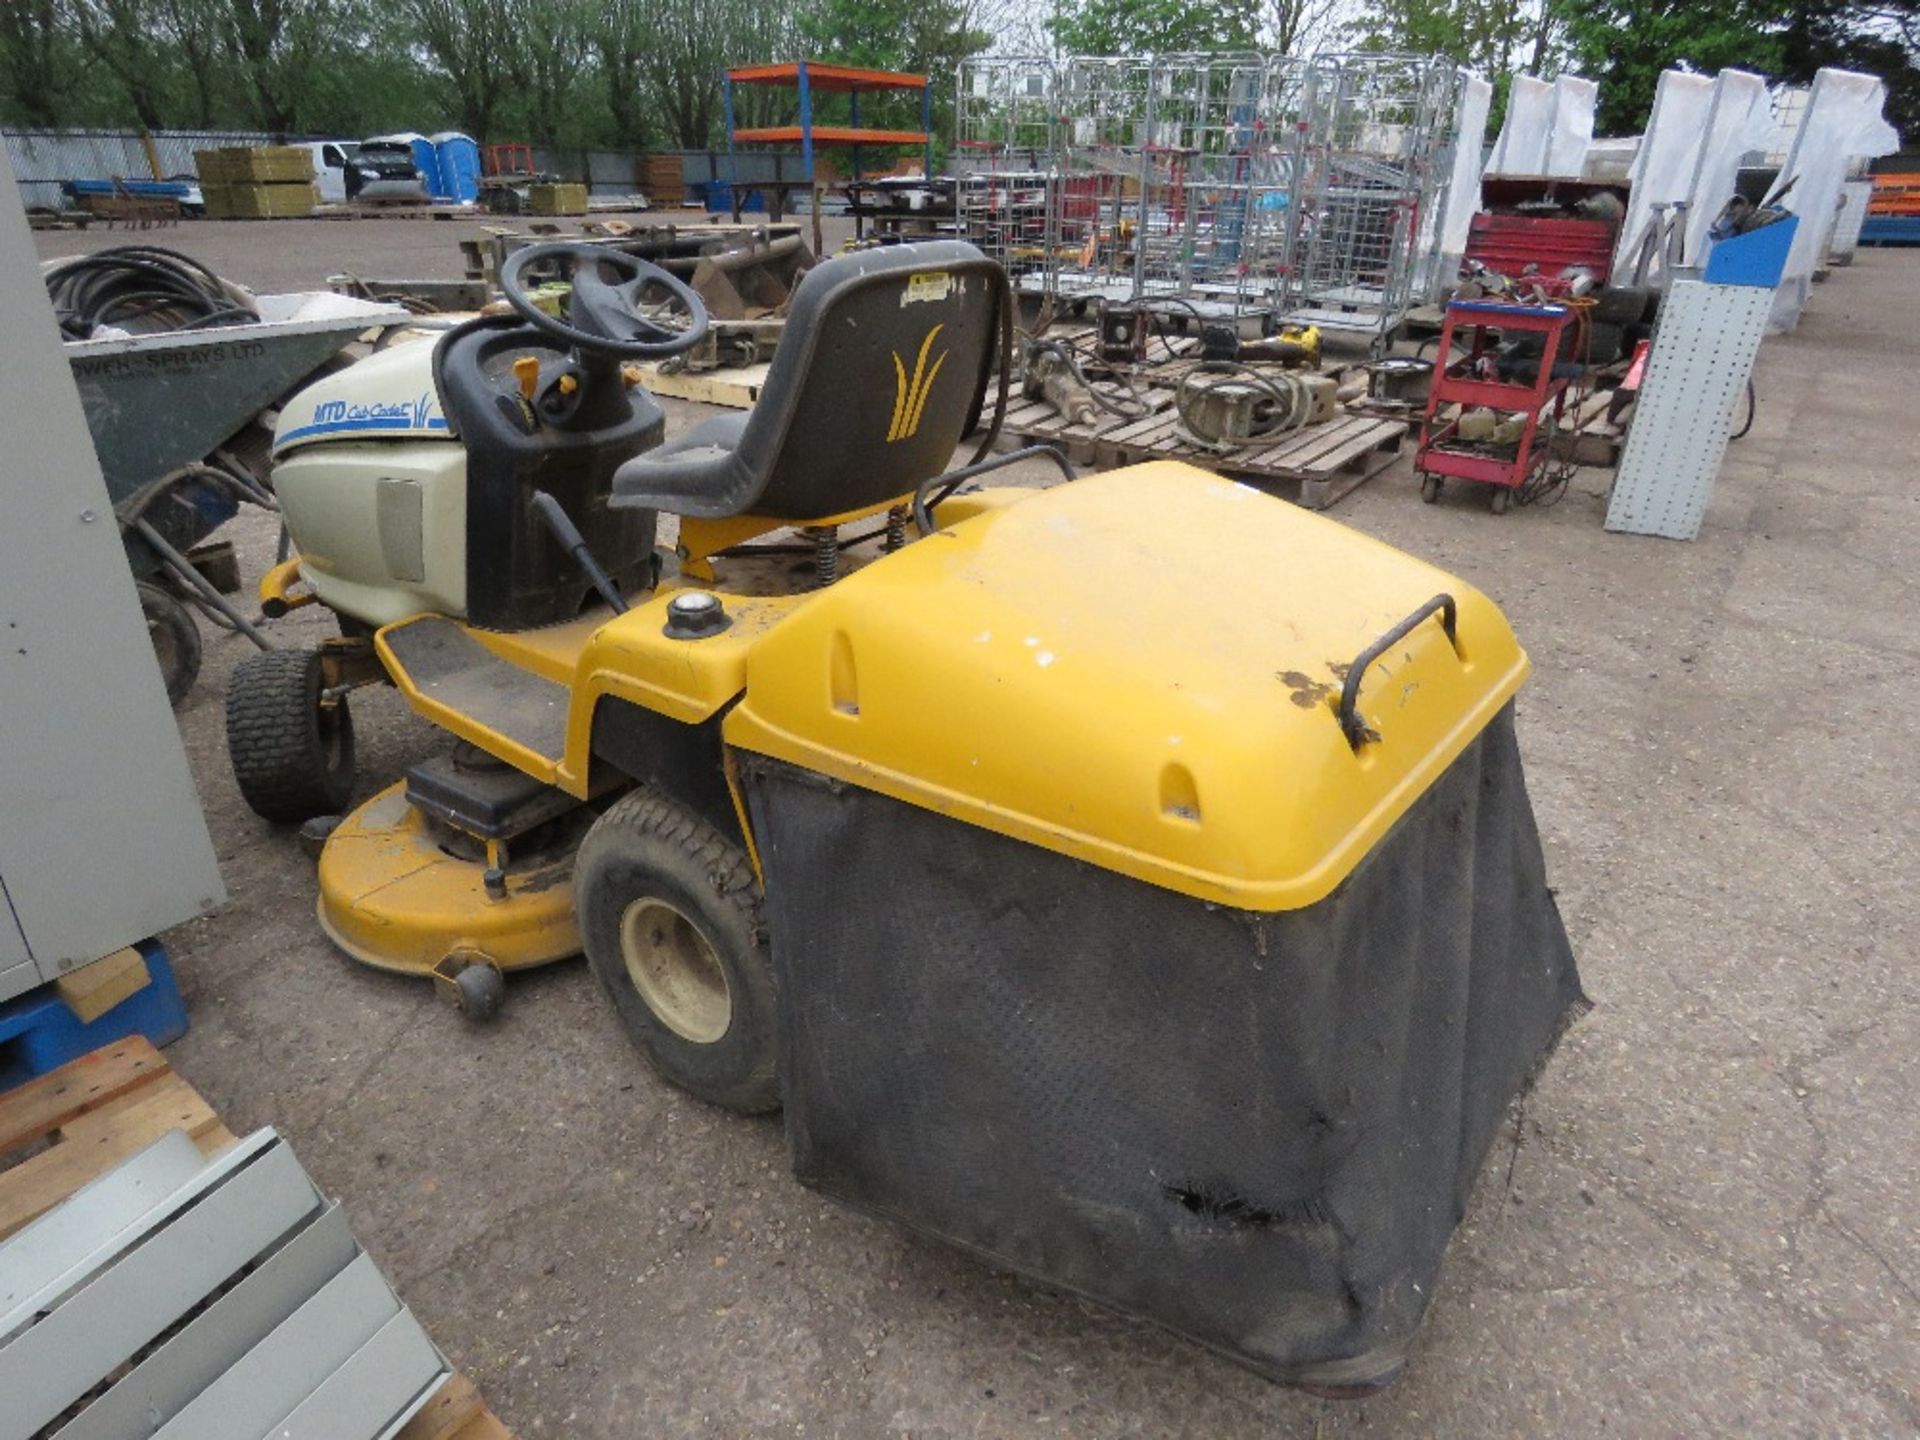 MTD CUB CADET PROFESSIONAL RIDE ON MOWER, PETROL ENGINED. BEEN IN STORAGE FOR SOME YEARS. NON RUNNER - Image 2 of 5